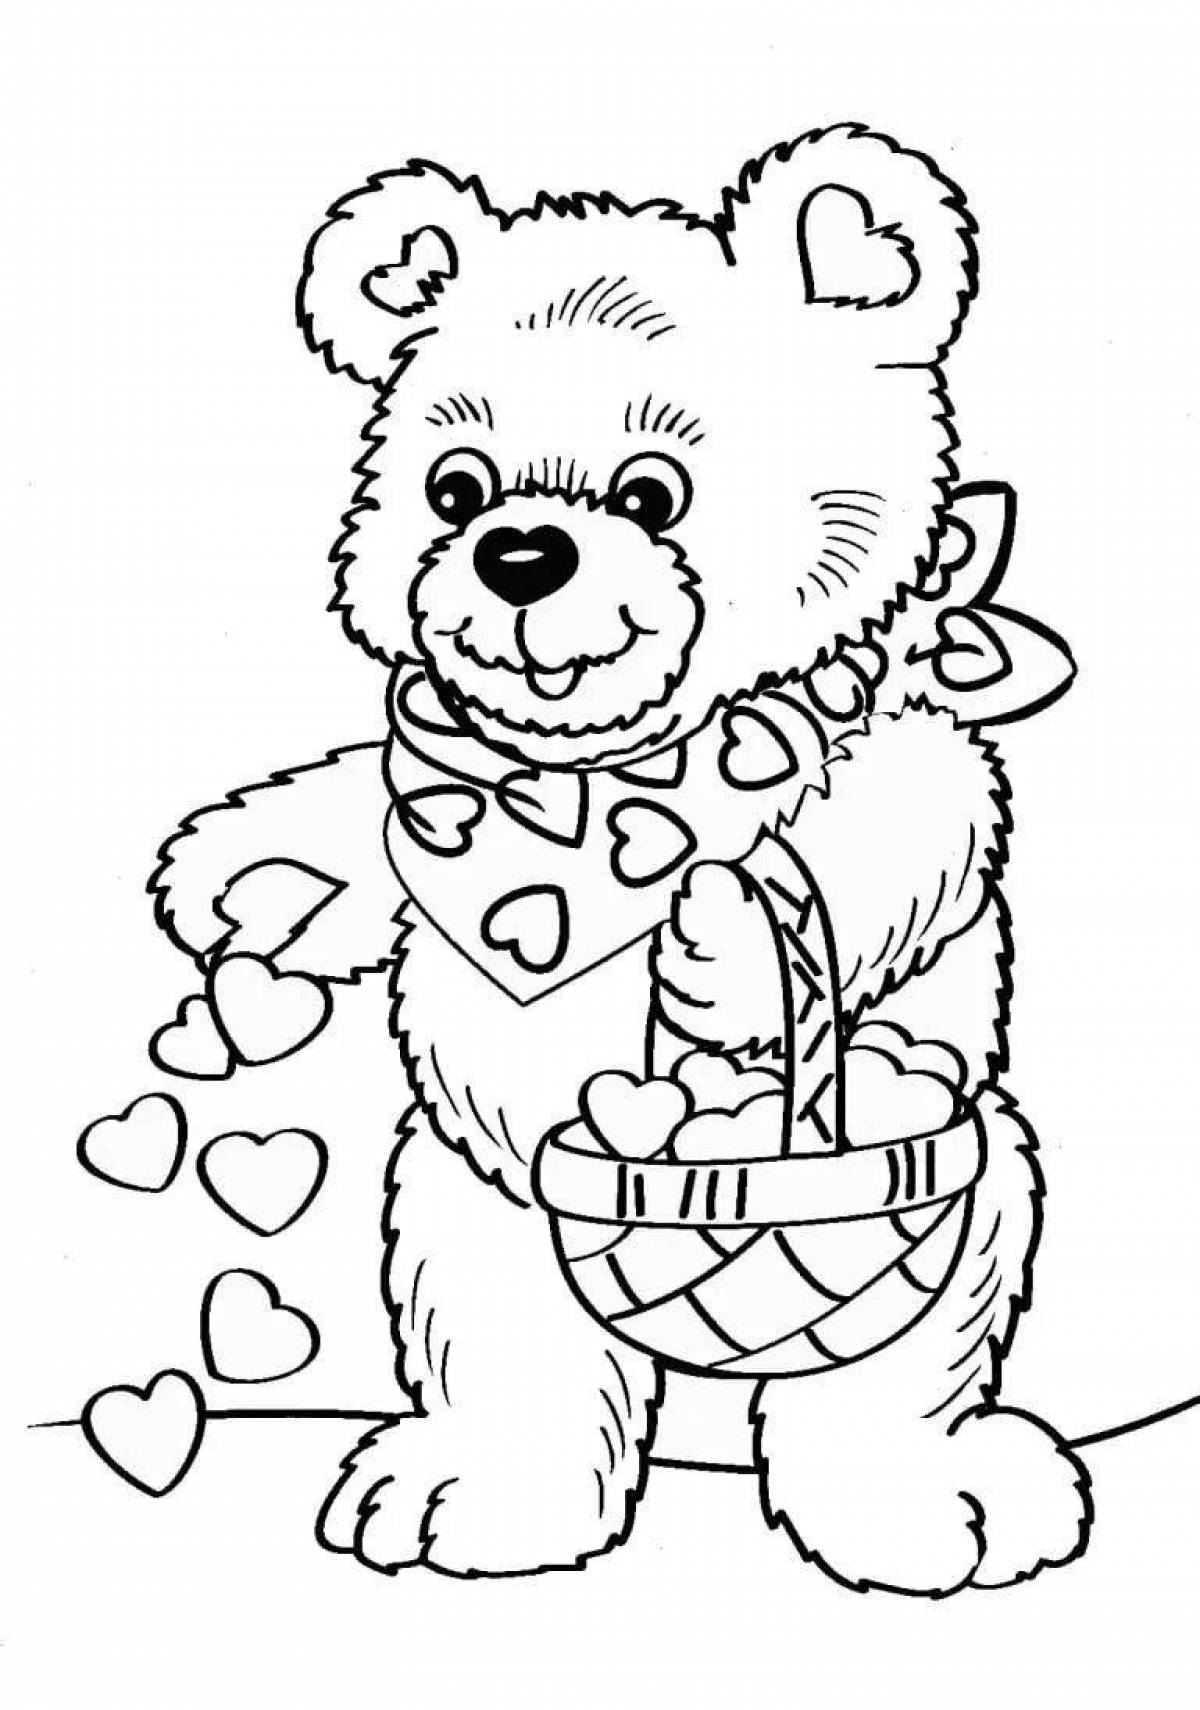 Playful teddy bear coloring page for girls